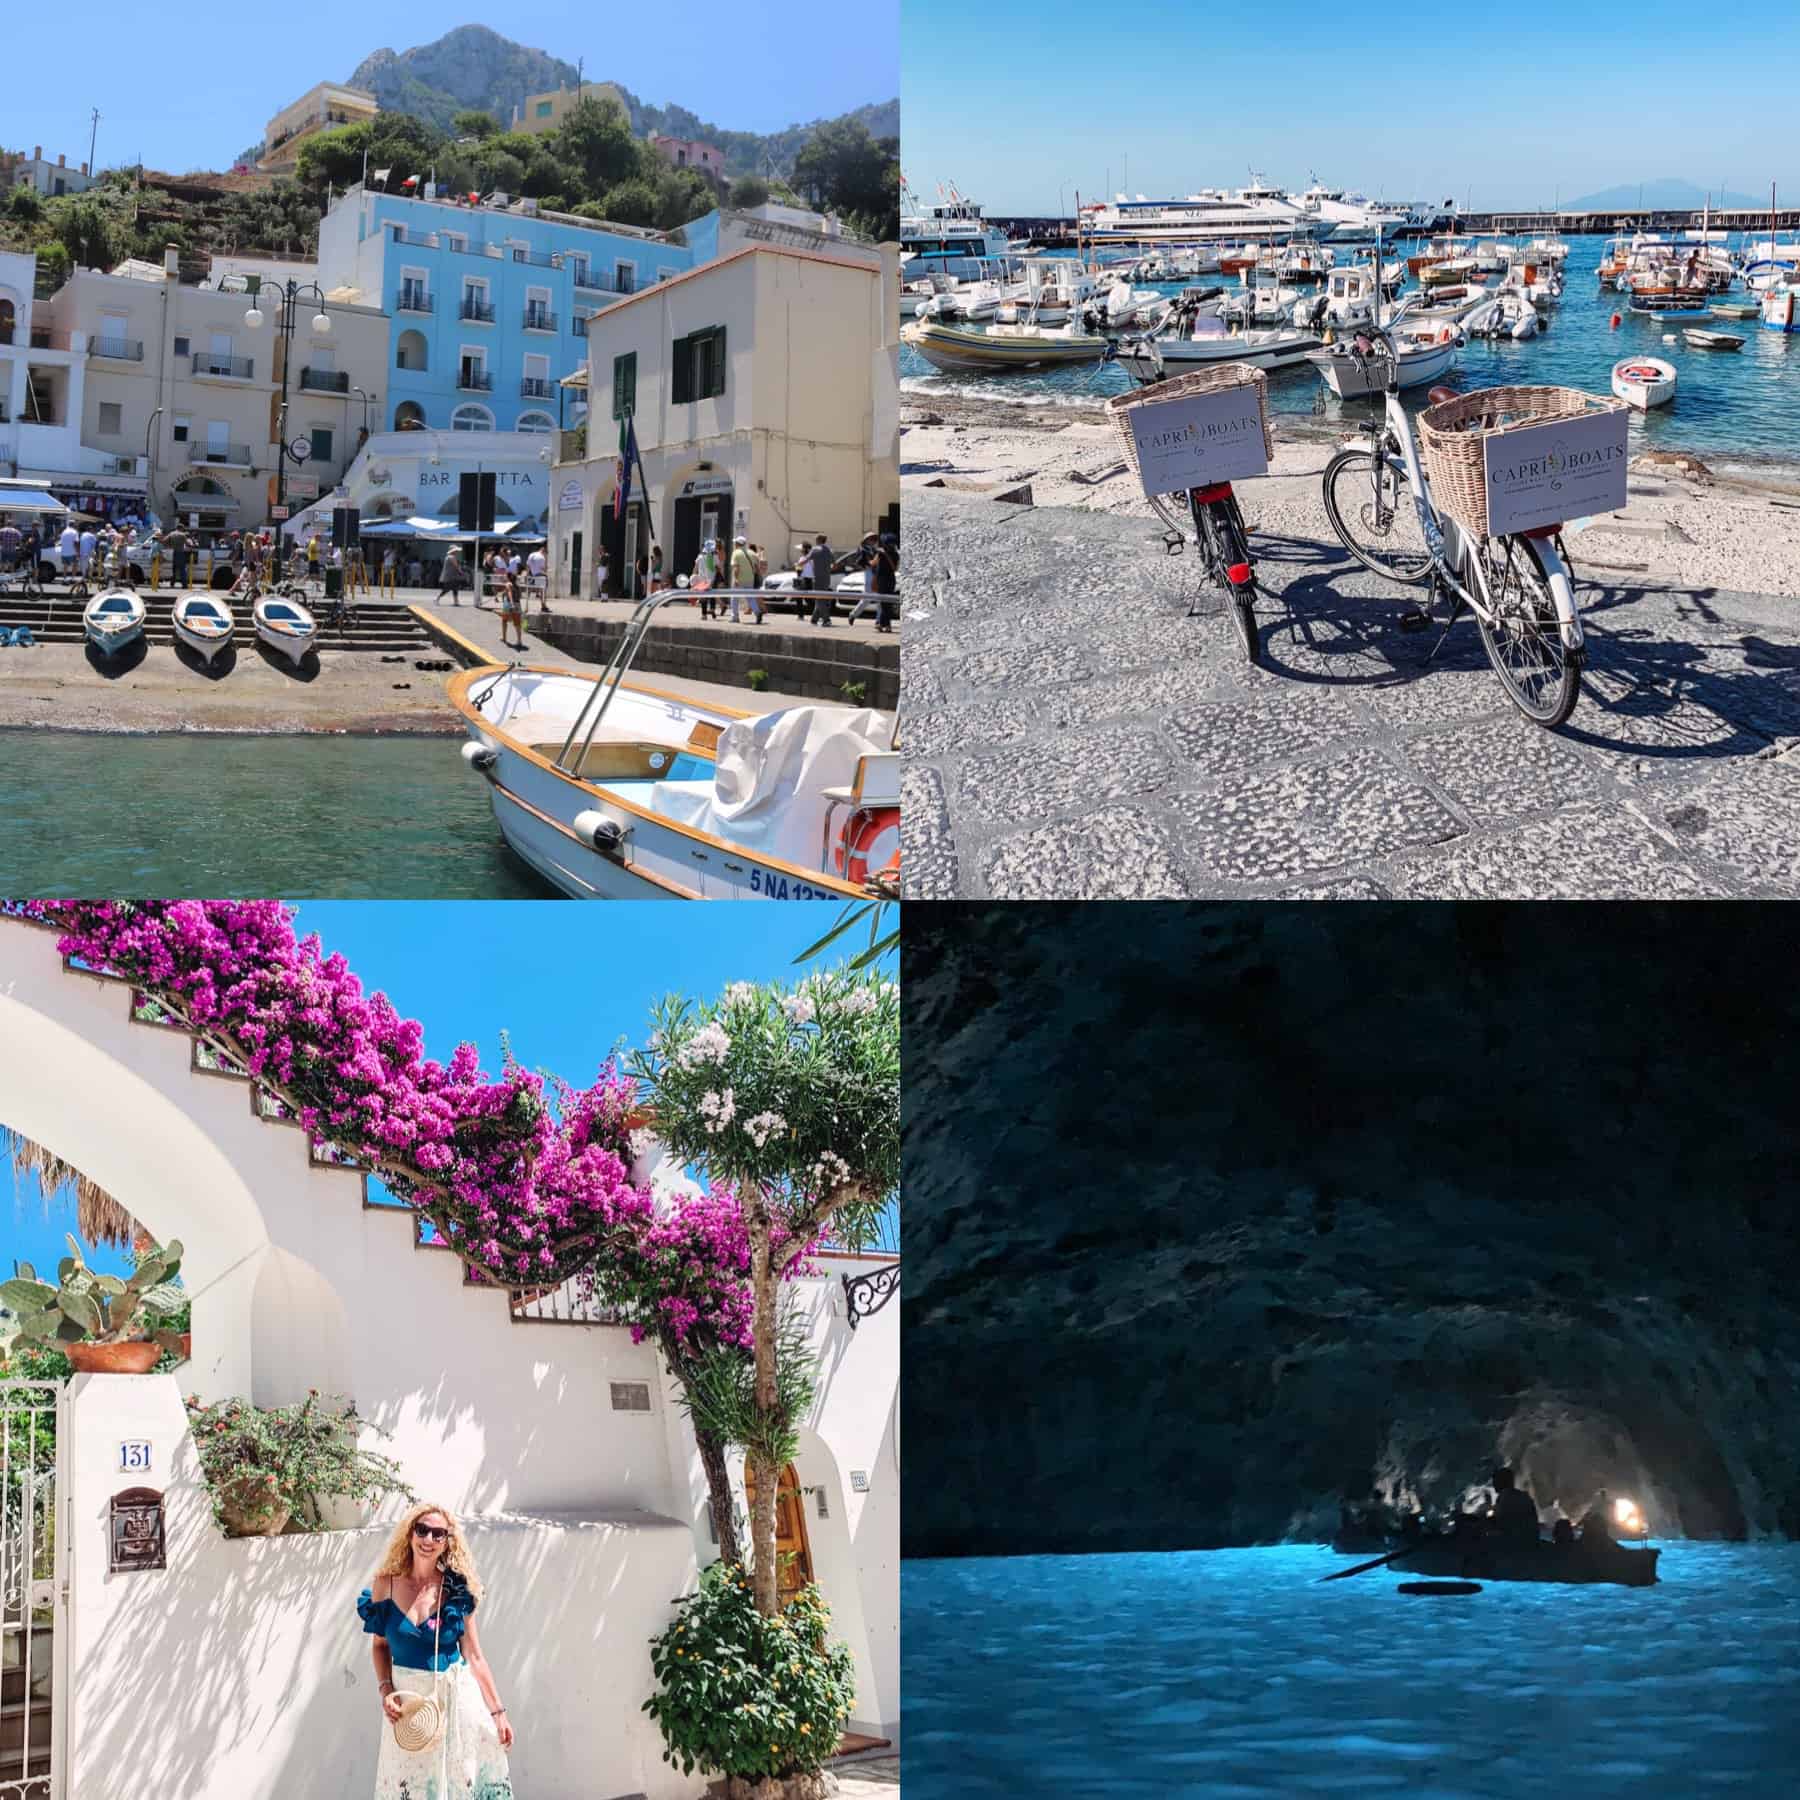 TIPS IF YOU VISIT CAPRI, ANACAPRI AND THE BLUE GROTTO